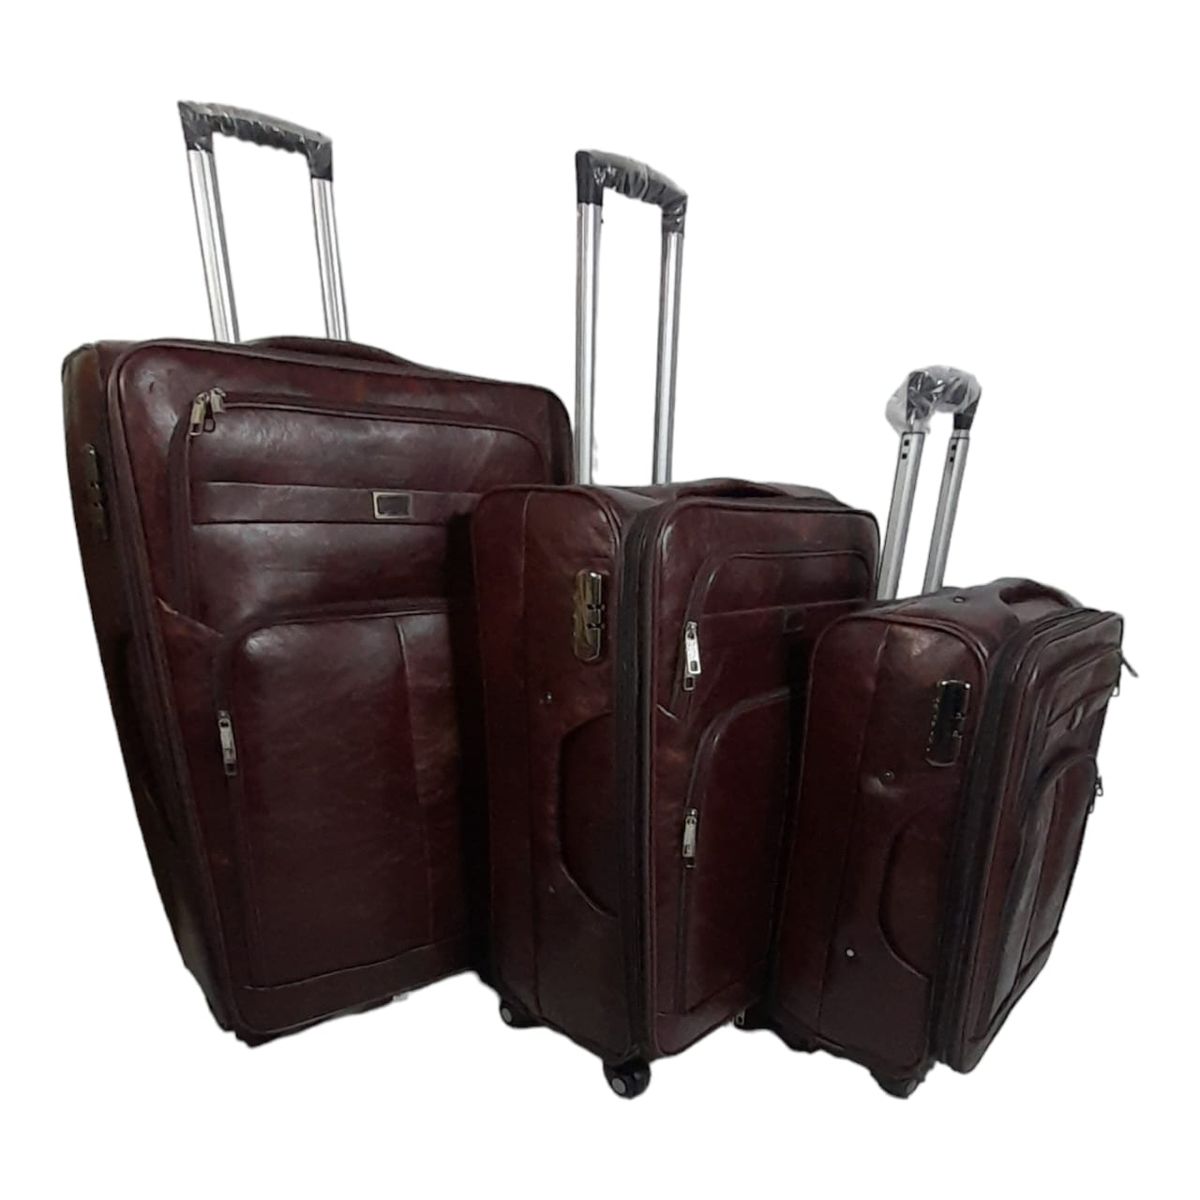 Smte-Luggage PU Leather Travel Suitcases - Set of 3 - Brown | Shop ...